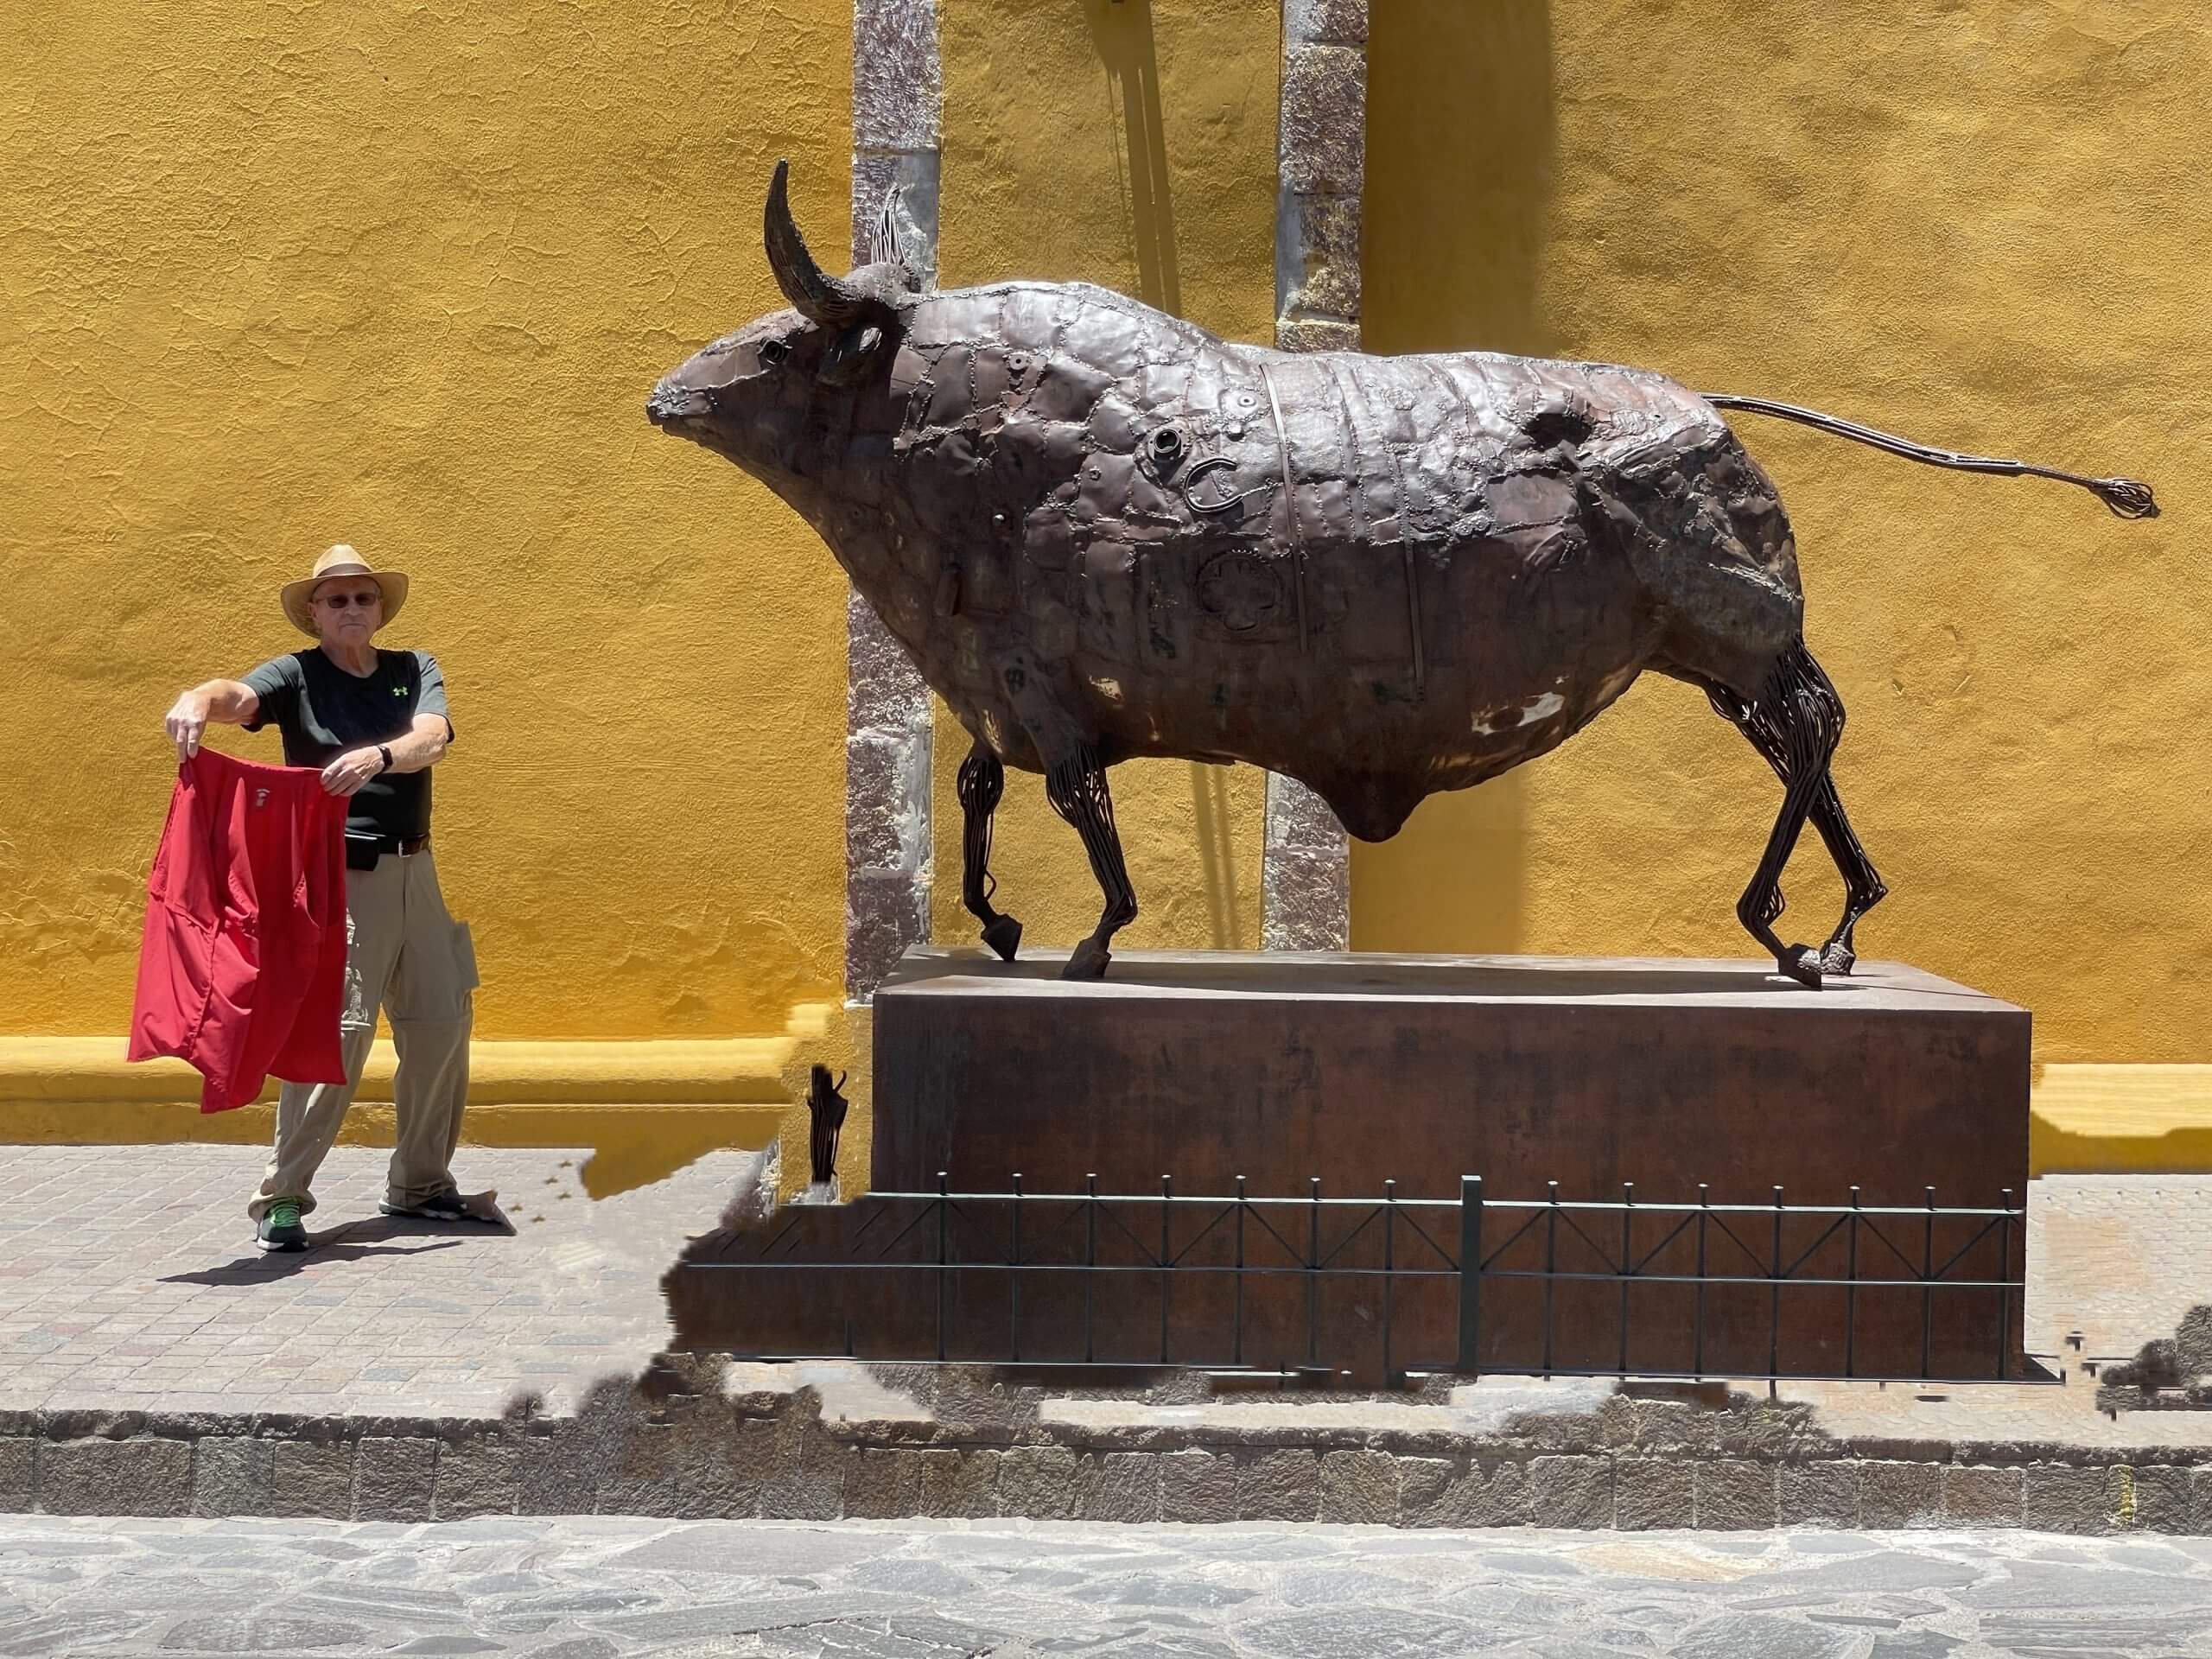 EJK holding a red shirt in front of a statue of a bull symbolizing a bull fight